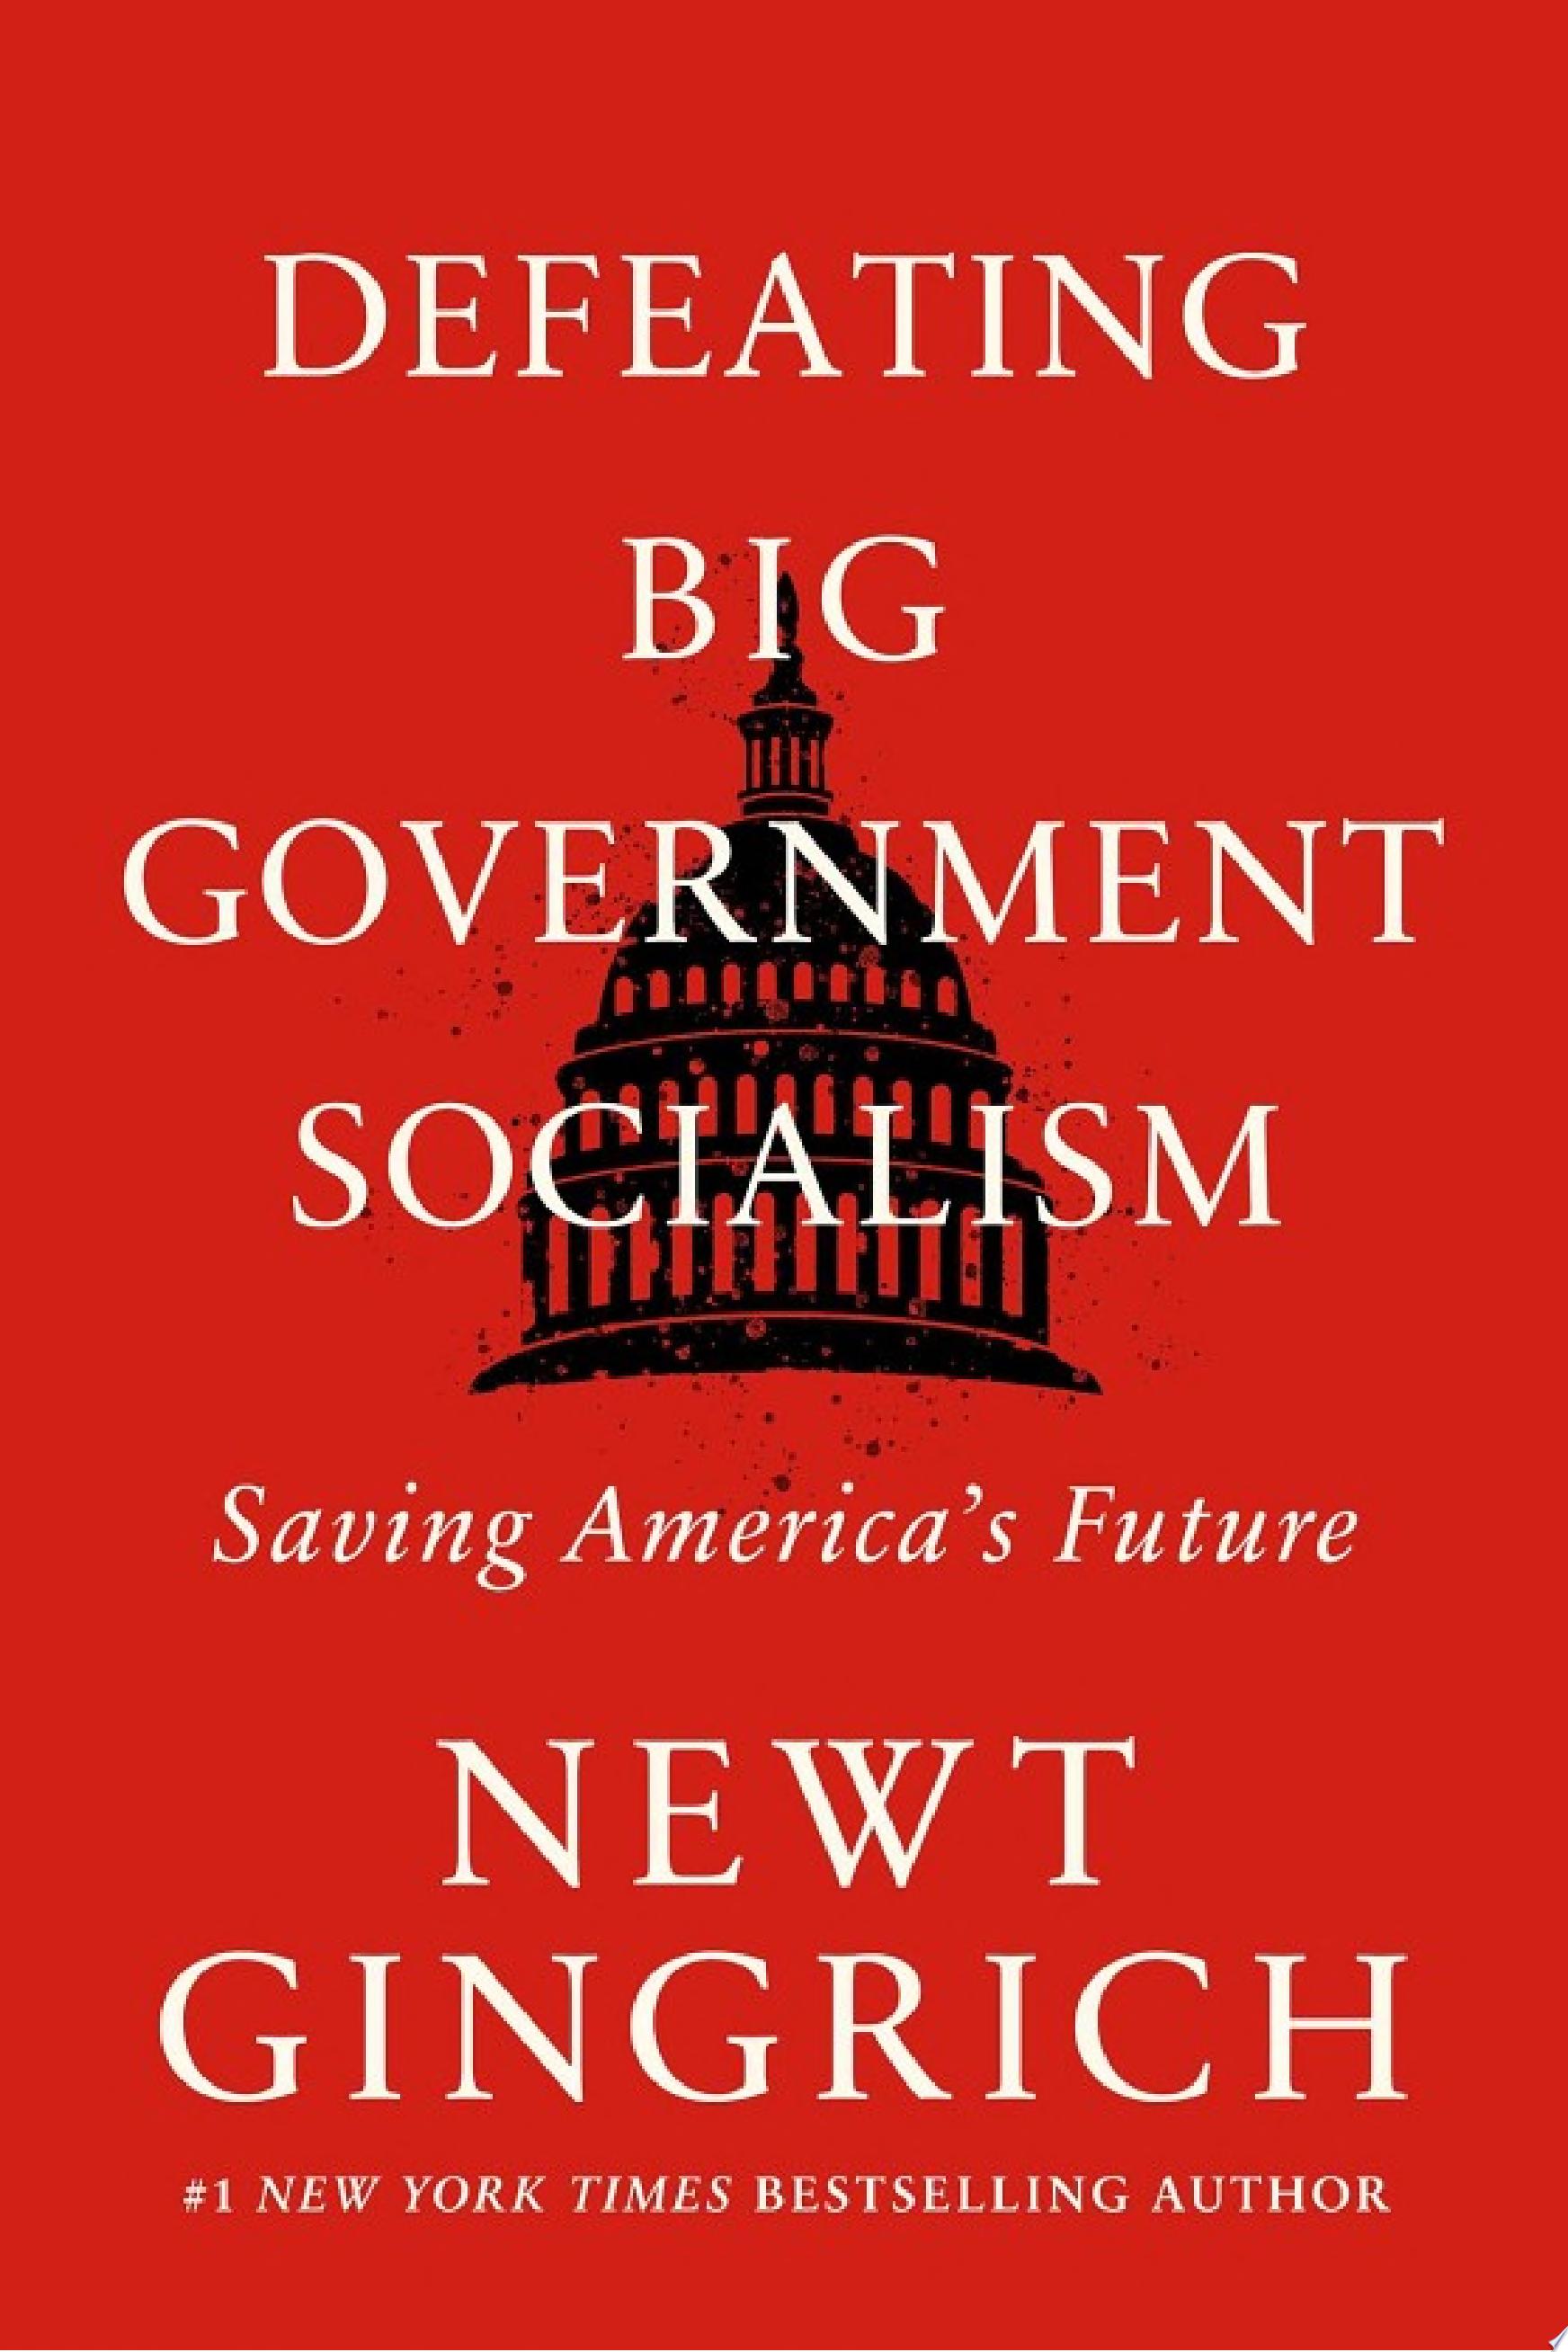 Image for "Defeating Big Government Socialism"